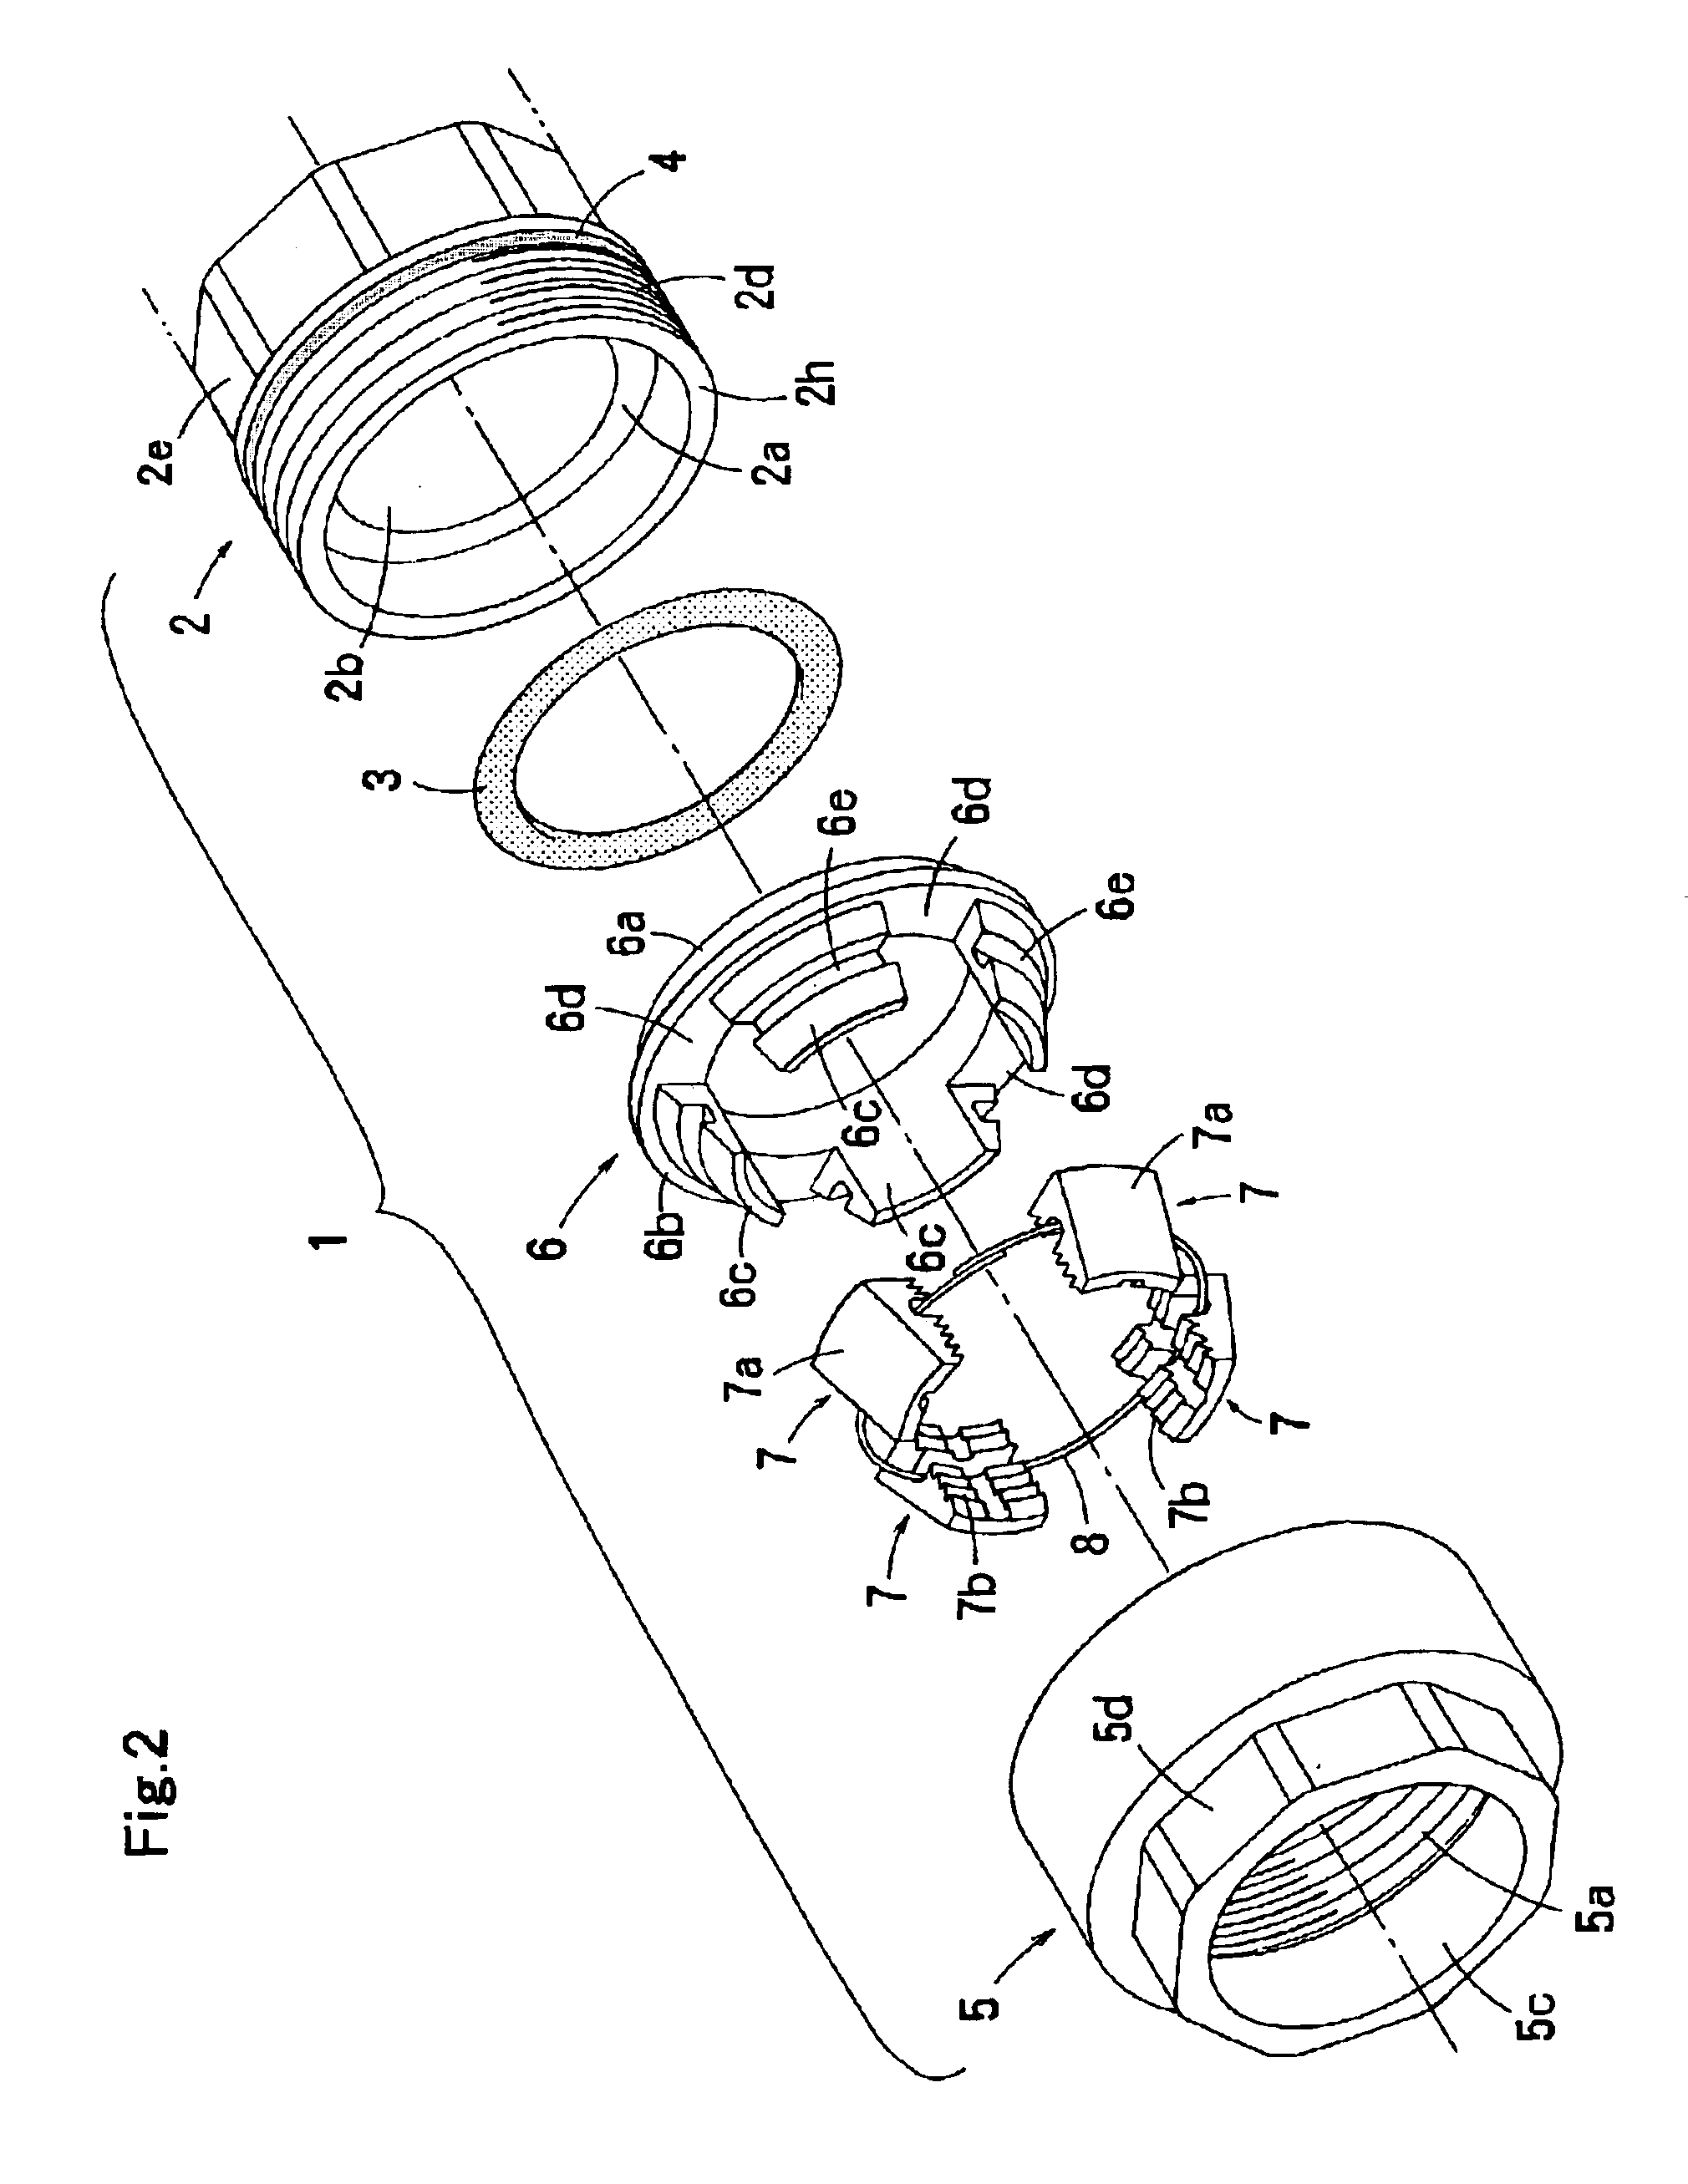 Pipe-coupling device